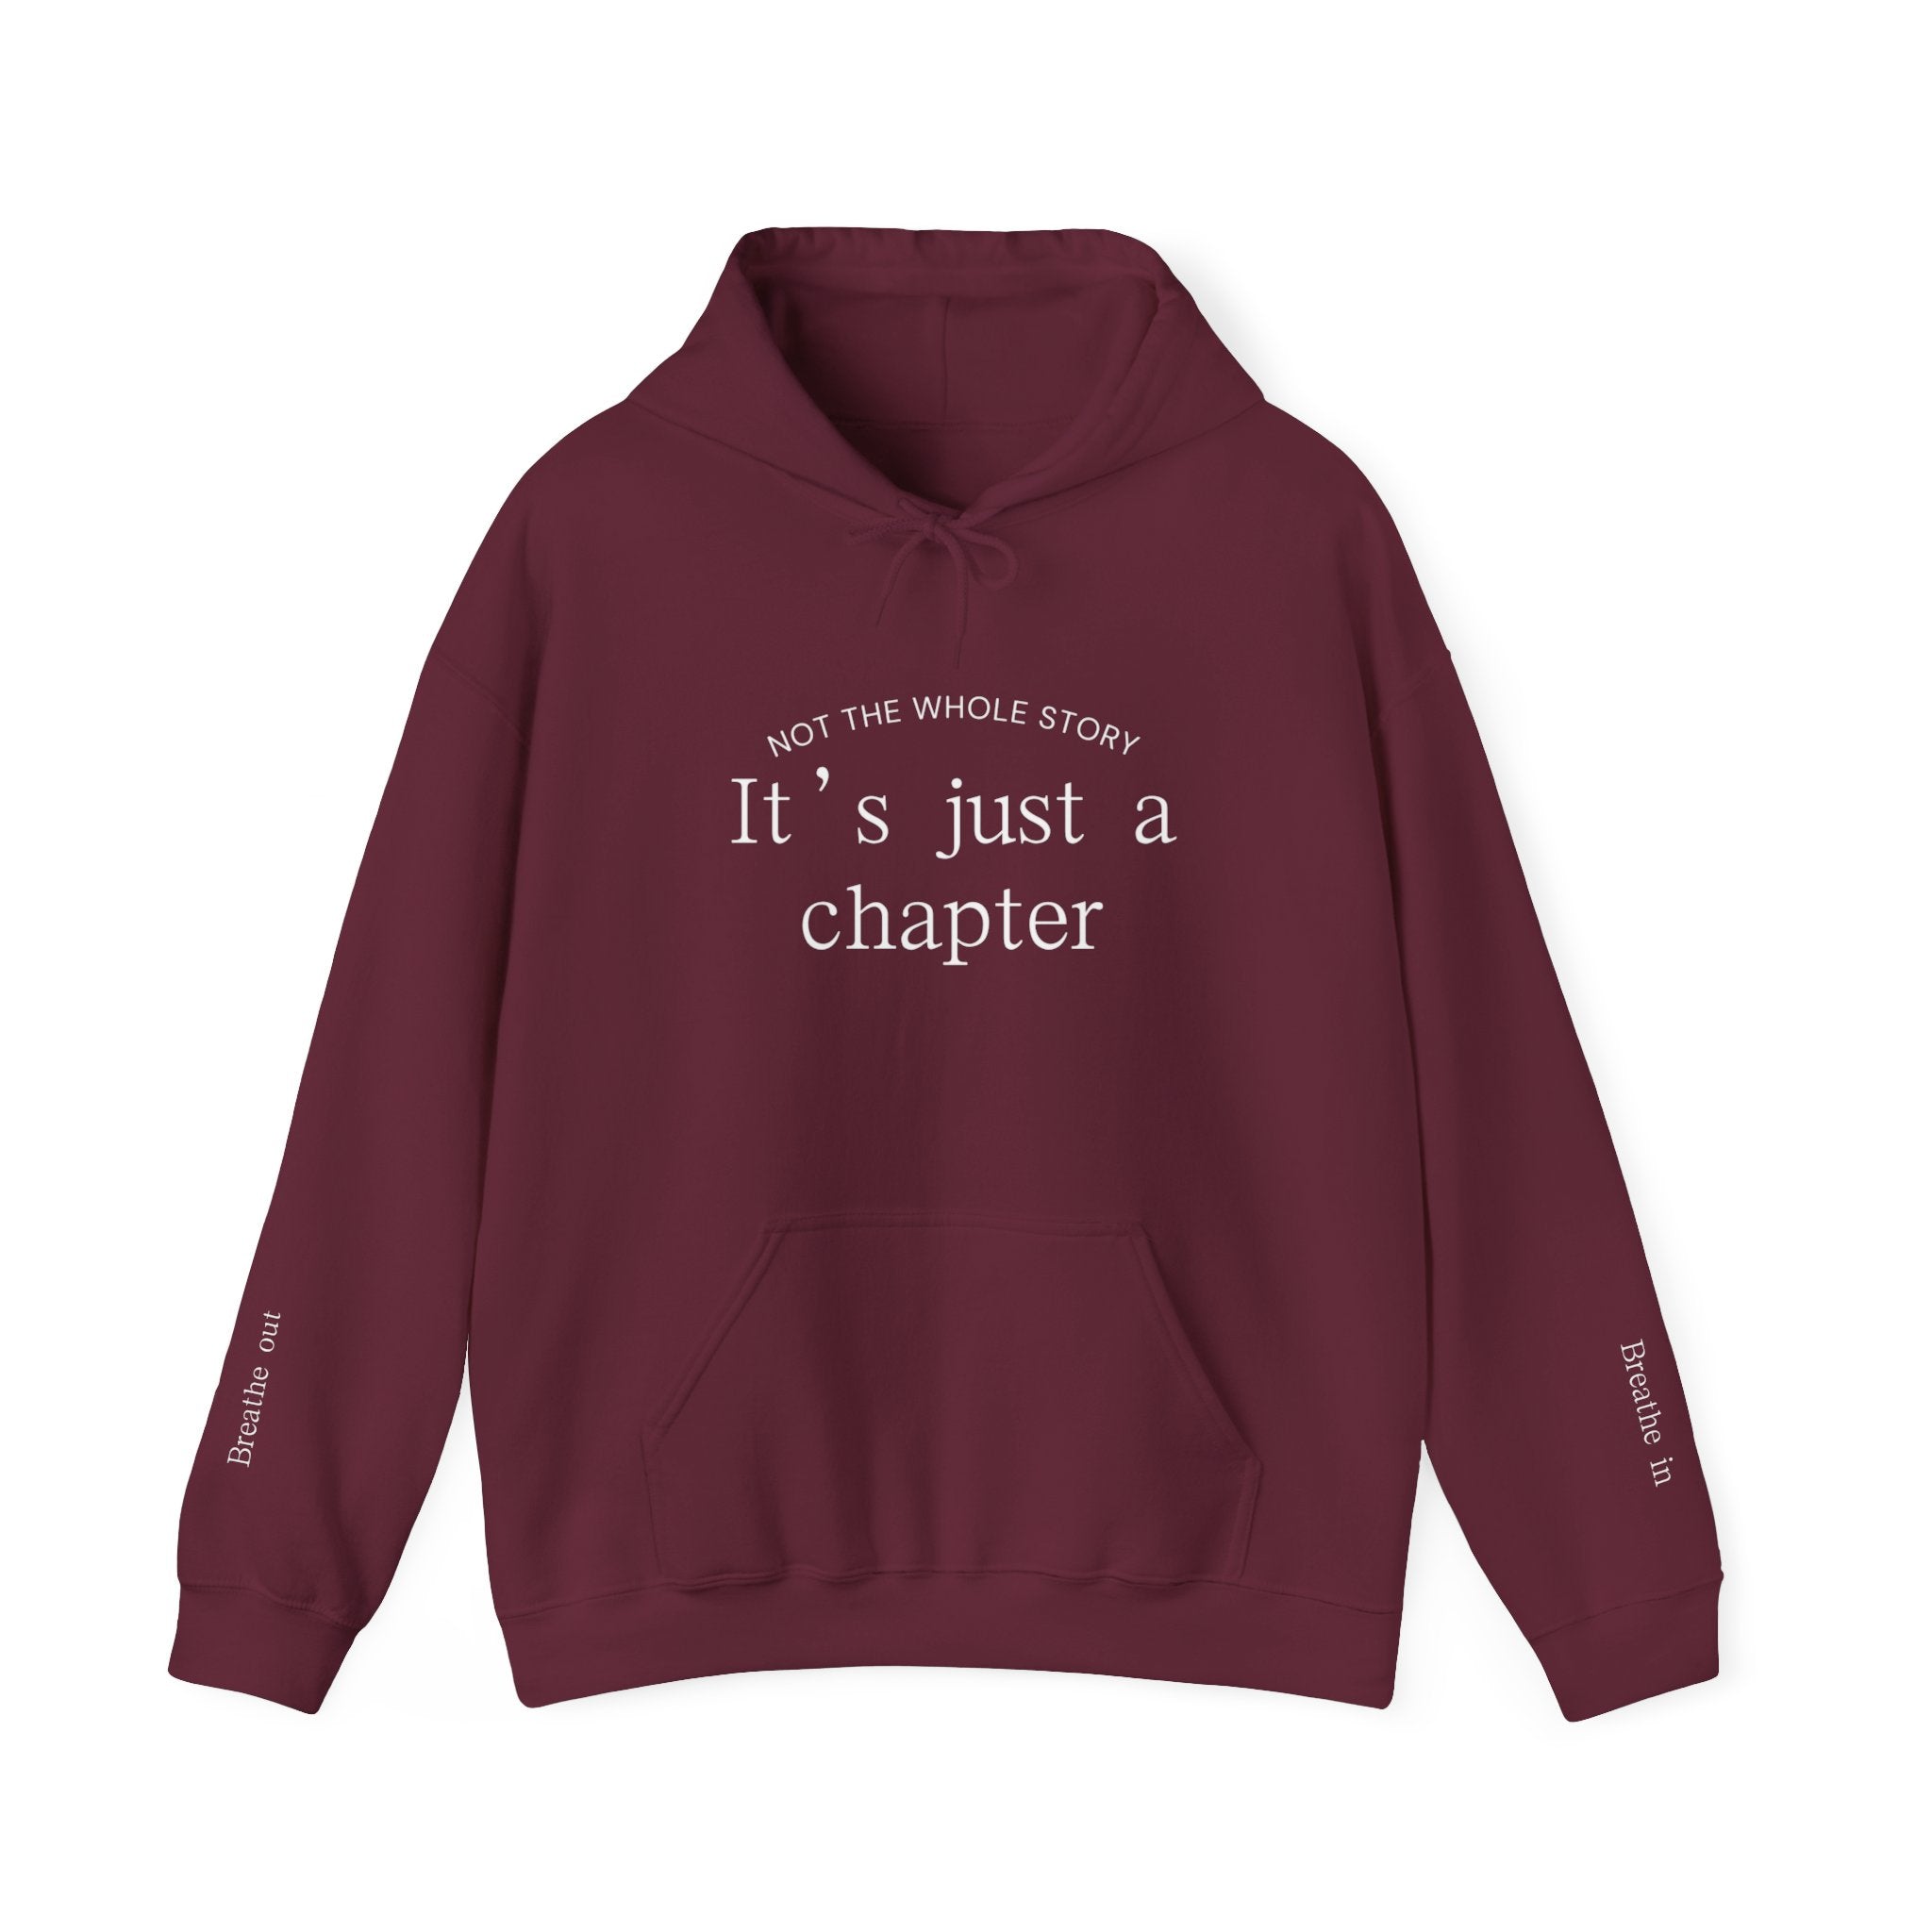 It’s just a chapter Hooded Sweatshirt